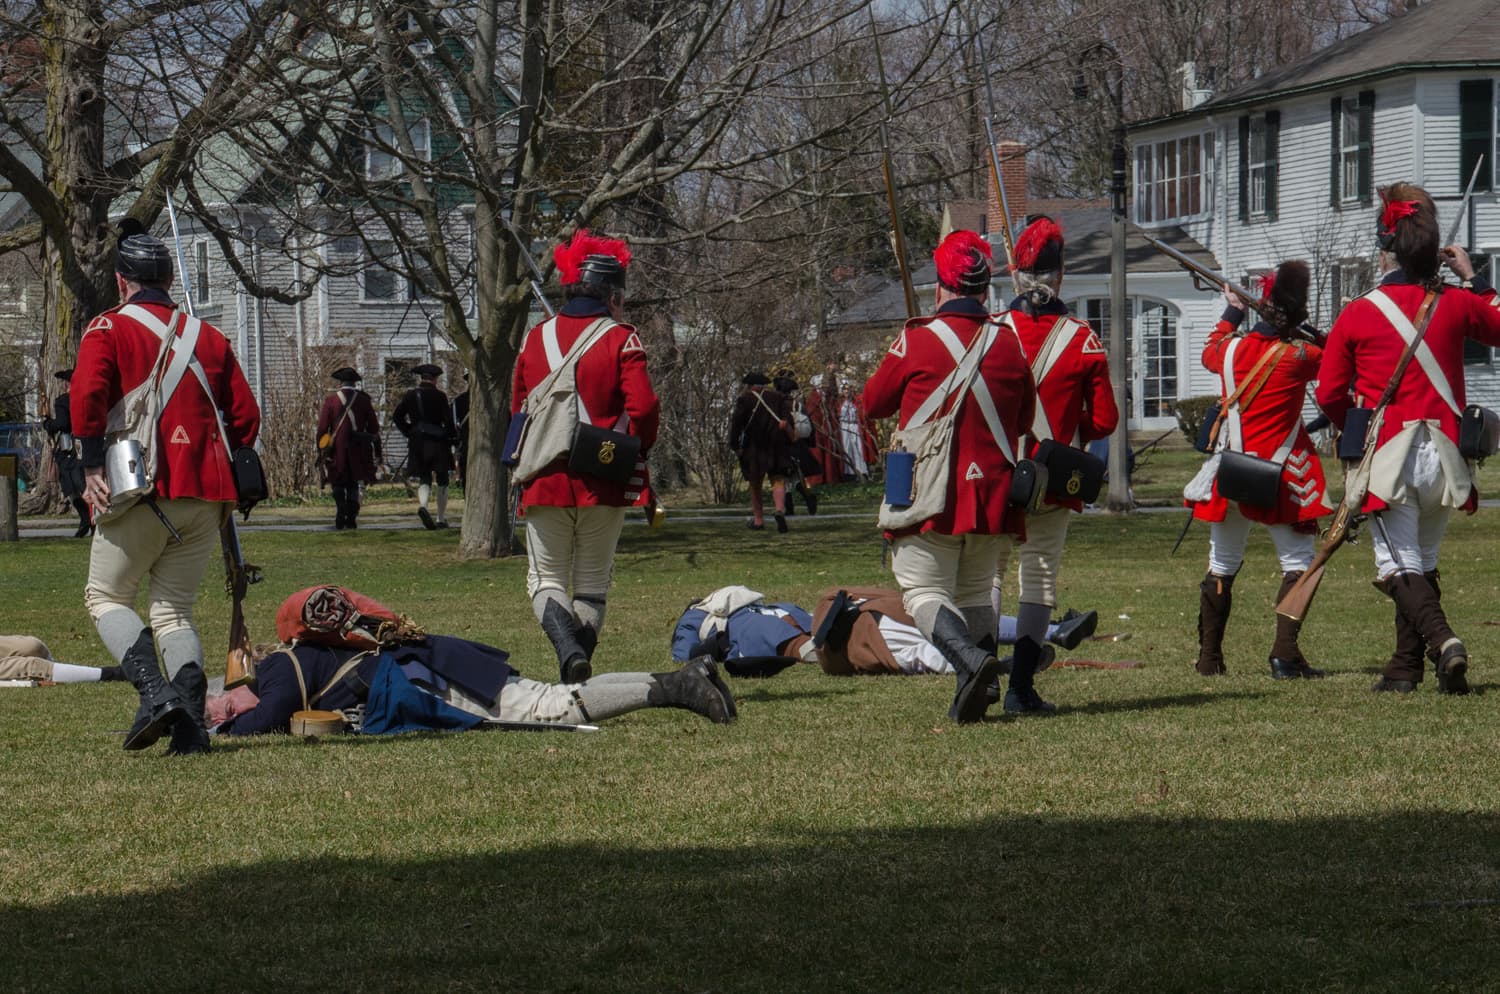 As the rehearsal concludes, the Redcoats march through the fallen on Lexington Green. (Sharon Brody/WBUR)